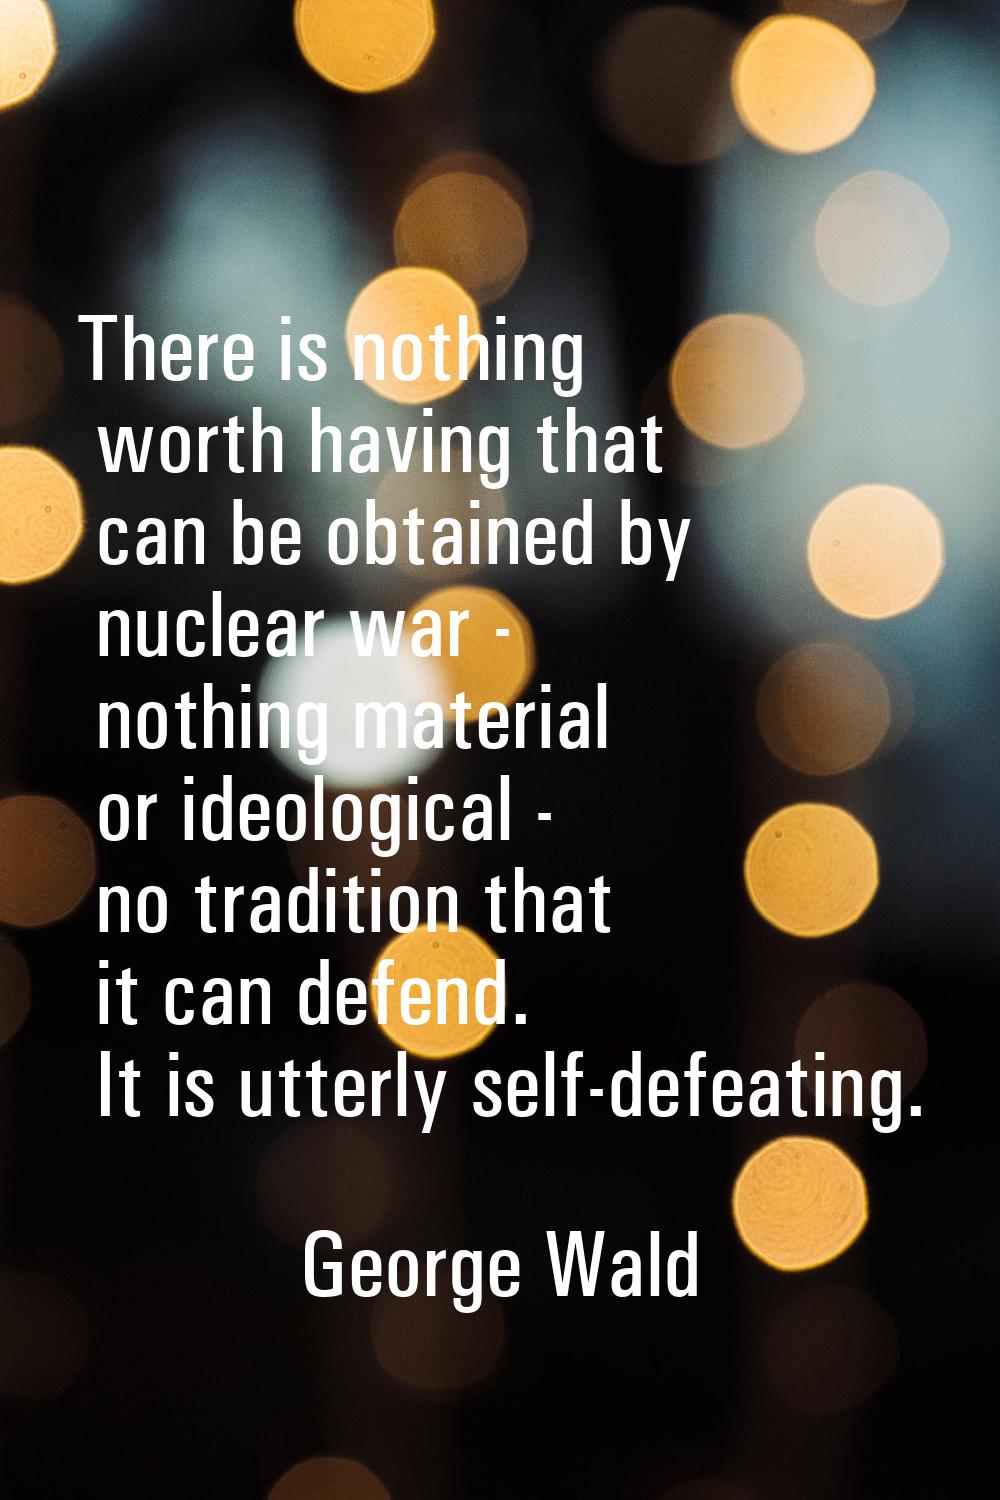 There is nothing worth having that can be obtained by nuclear war - nothing material or ideological